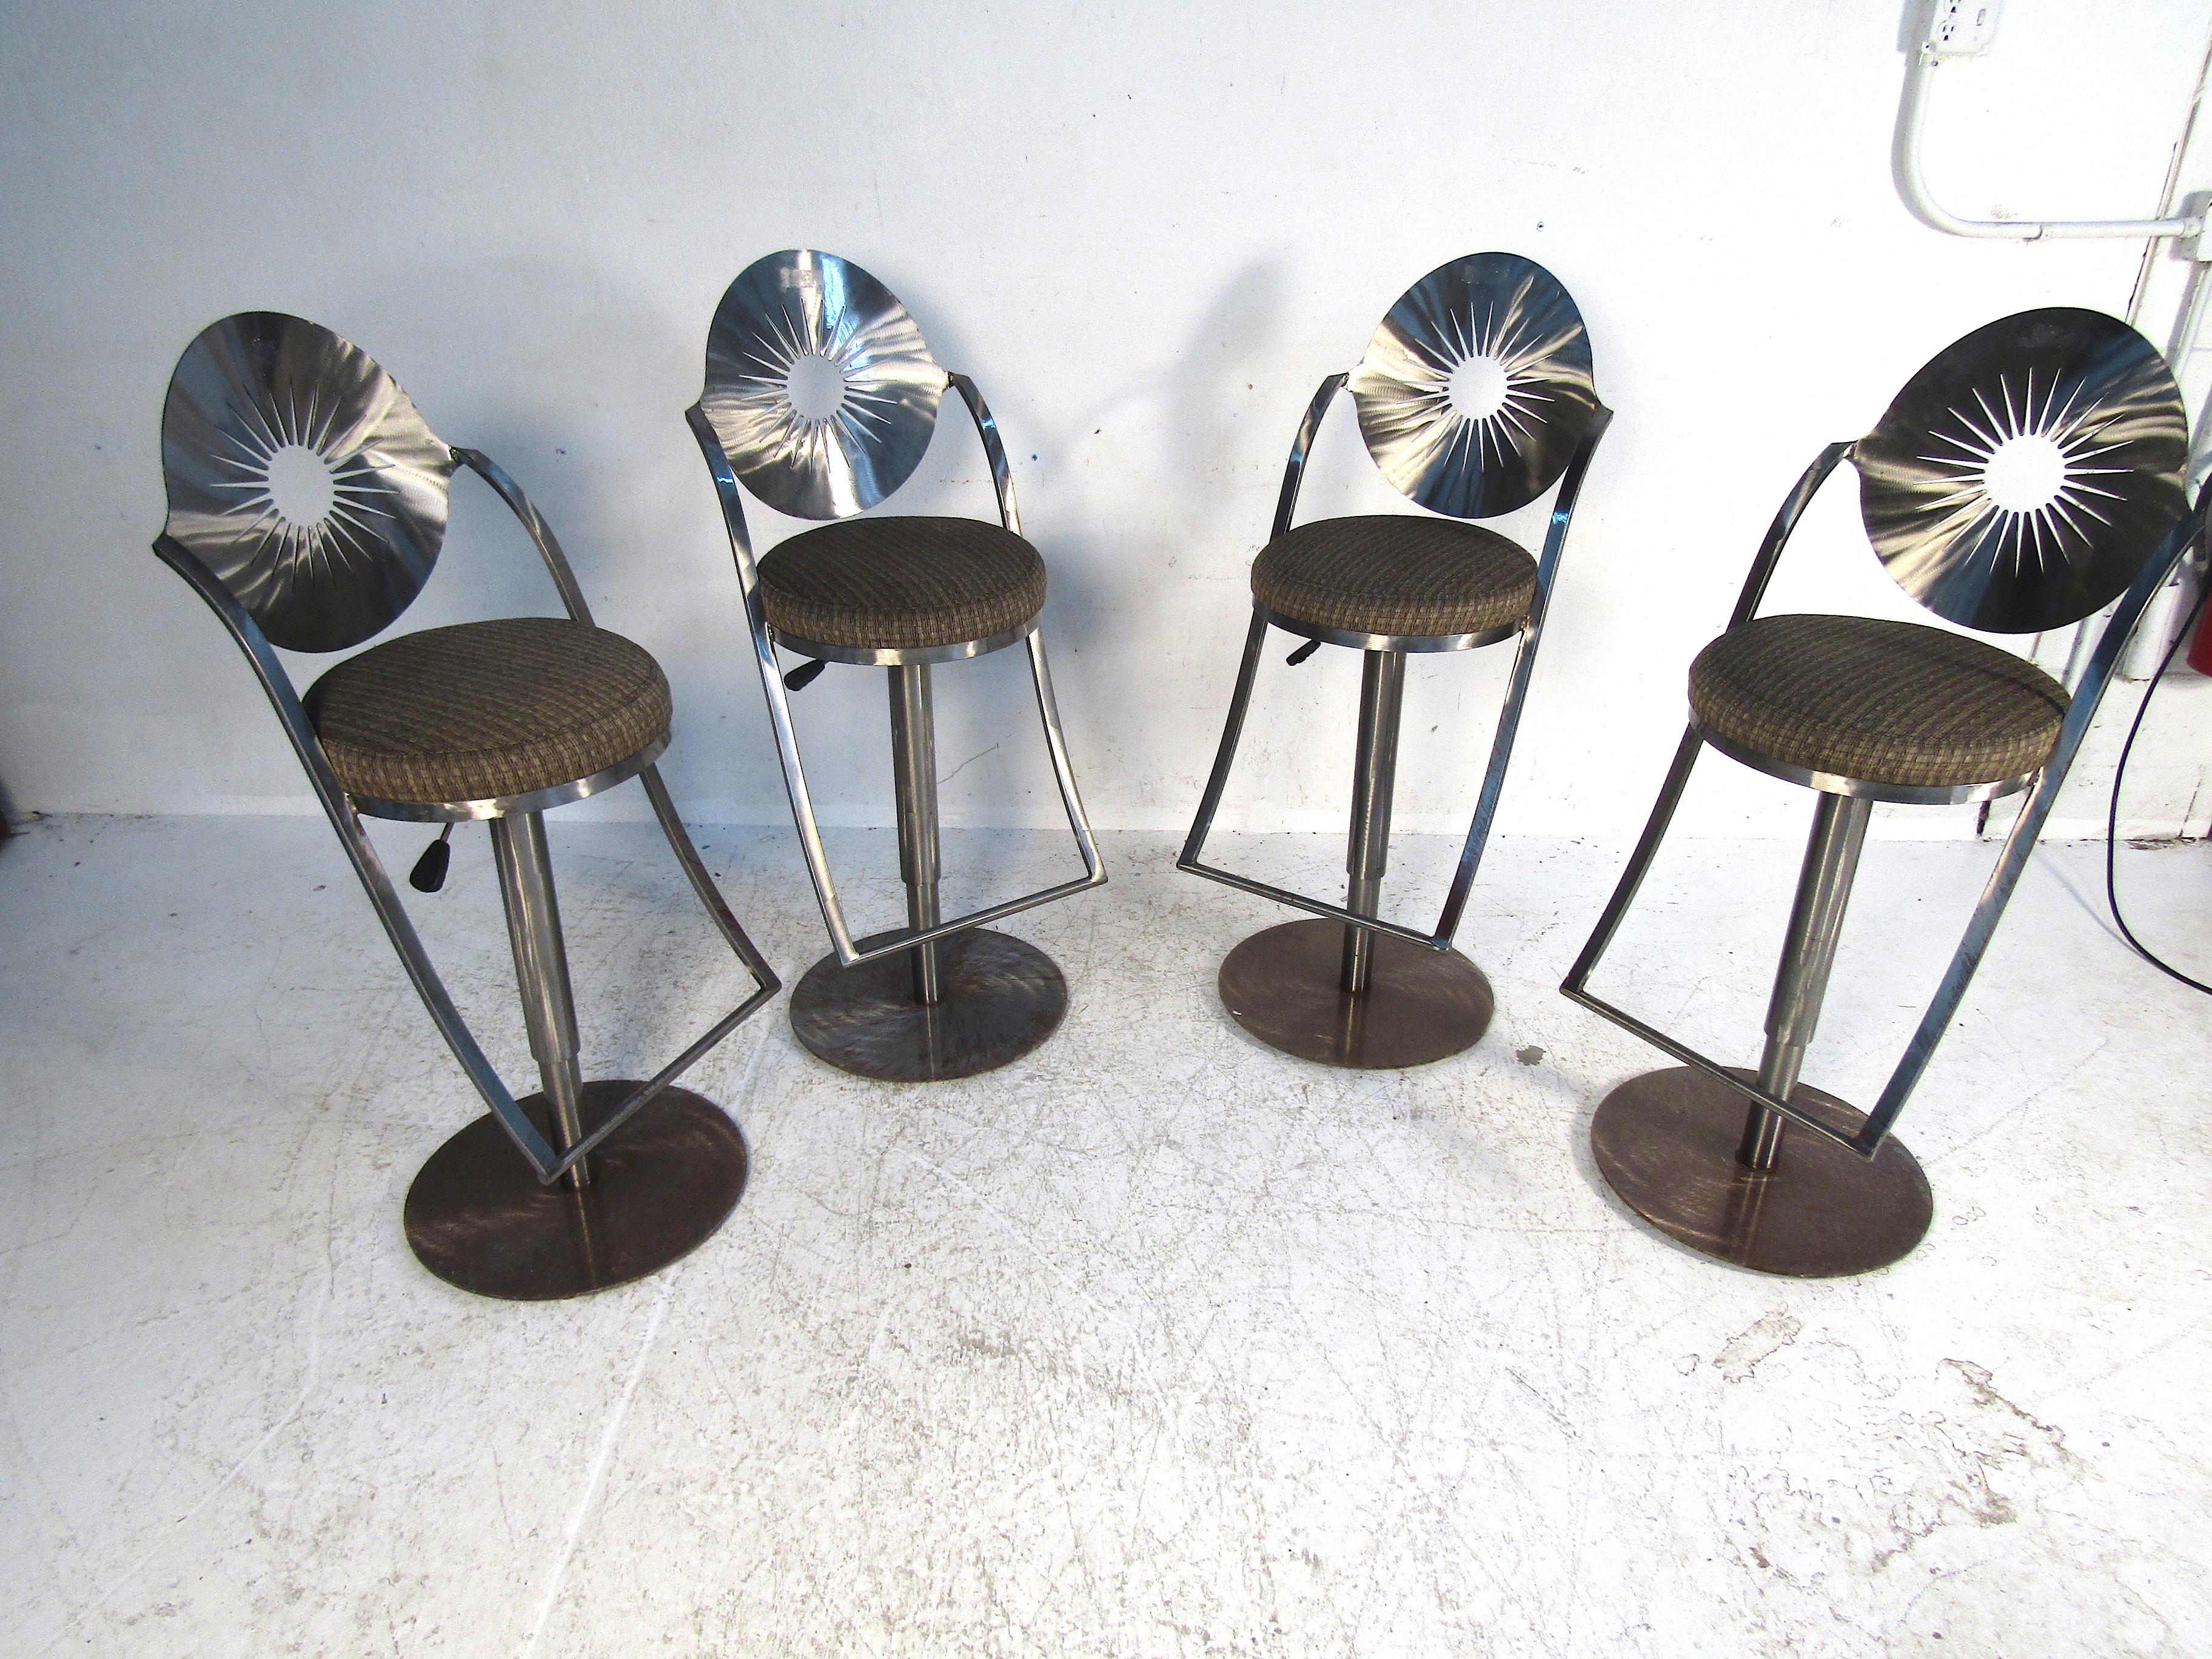 This set of vintage bar stools features heavy brushed steel construction and a plush upholstery base. The top half of the stools is one seamless piece of steel creating a very unique style. This set is perfect for any kitchen or home bar area.